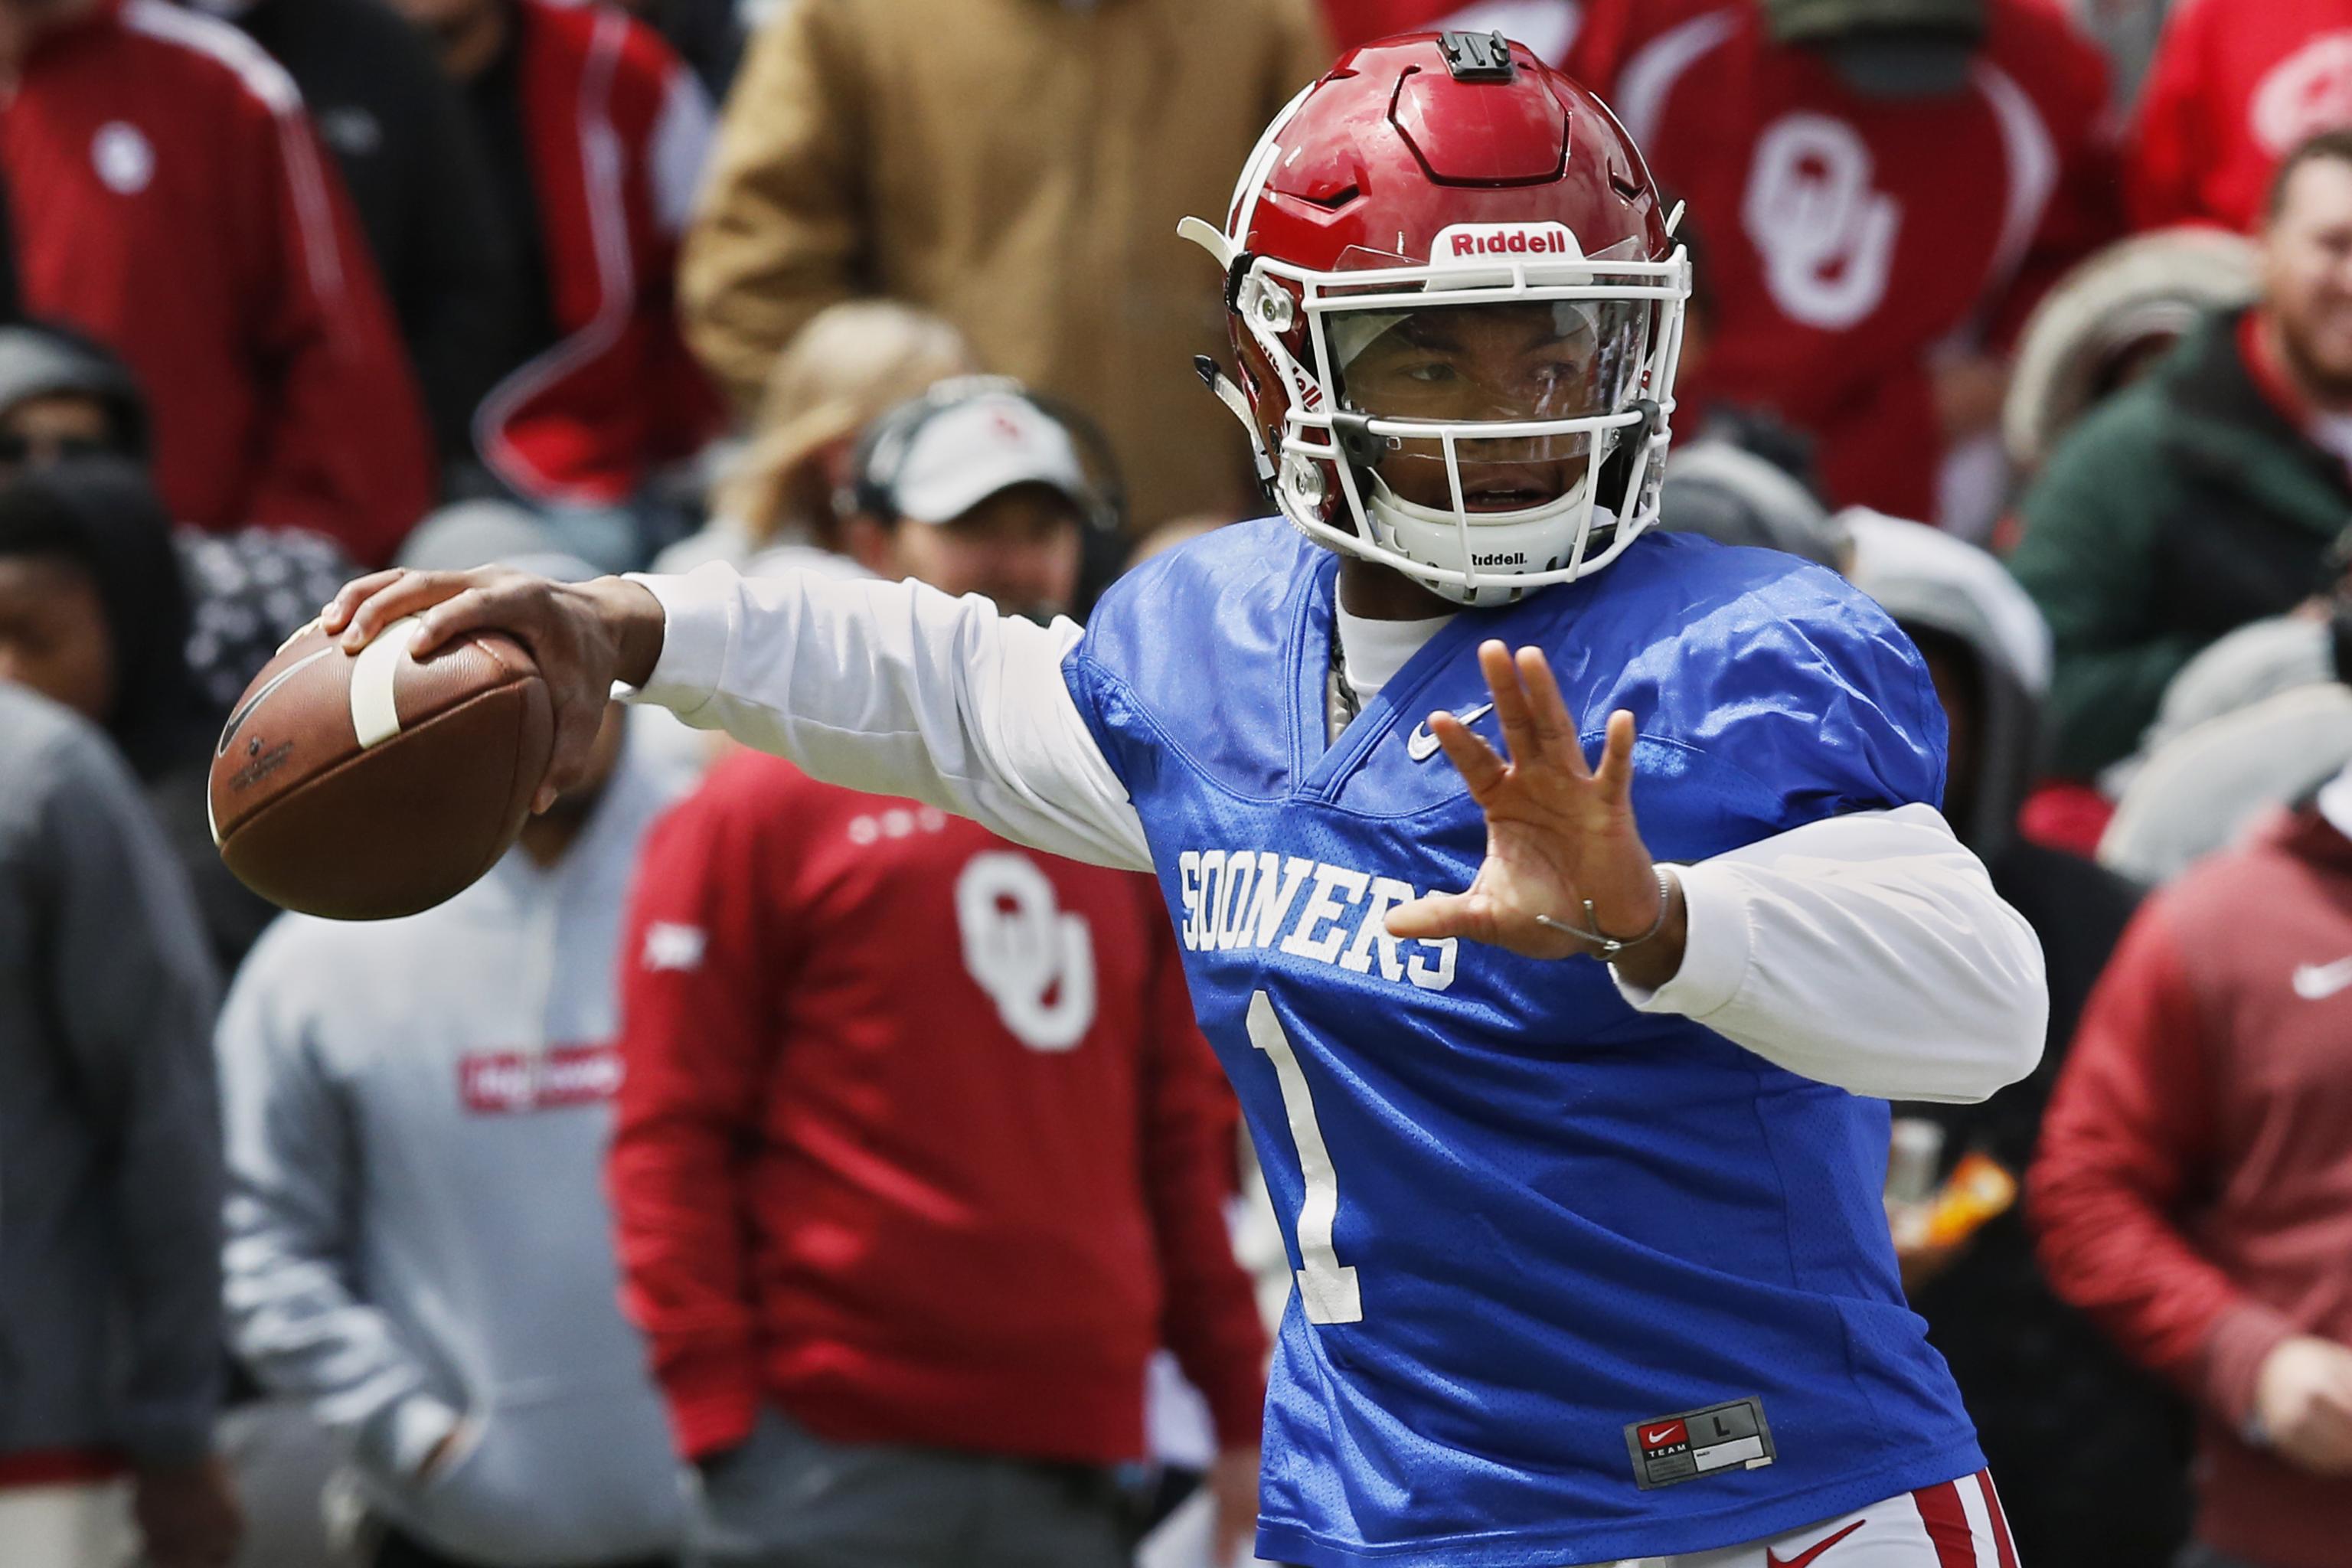 Something All MLB Fans Should Be Rooting For: Kyler Murray the A's  Outfielder, News, Scores, Highlights, Stats, and Rumors